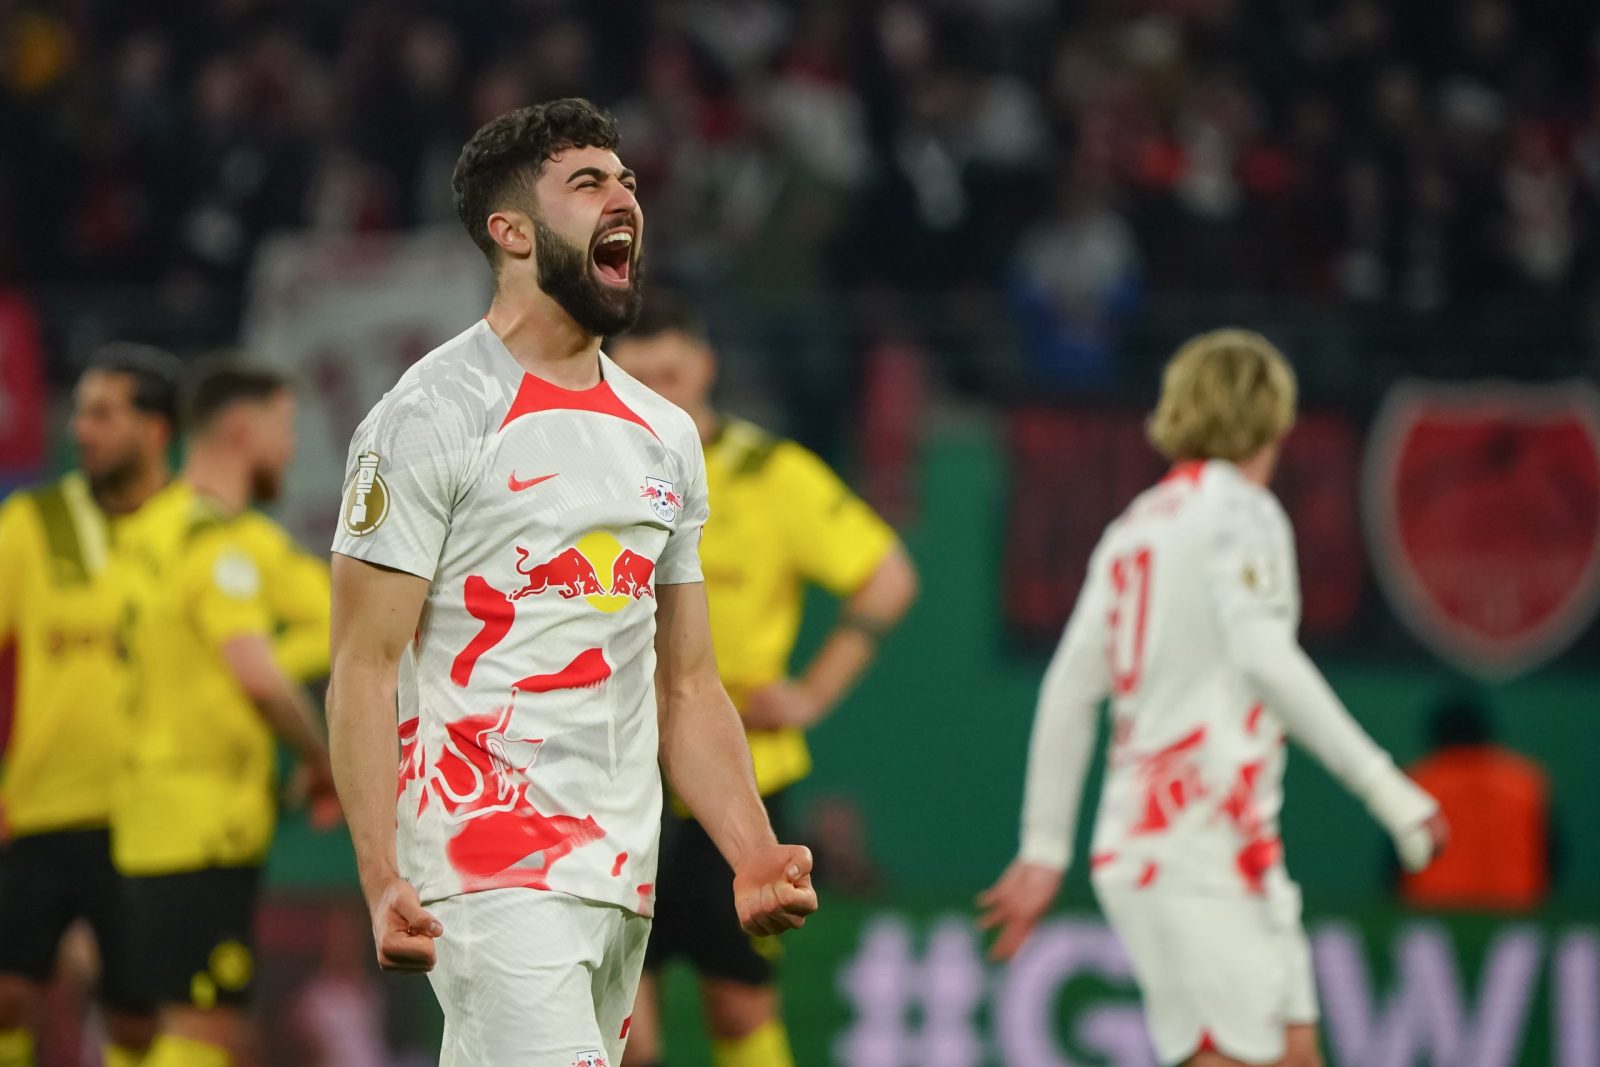 epa10560660 Josko Gvardiol of RB Leipzig celebrates after winning the German DFB Cup quarter final soccer match between RB Leipzig and Borussia Dortmund in Leipzig, Germany, 05 April 2023.  EPA/CLEMENS BILAN CONDITIONS - ATTENTION: The DFB regulations prohibit any use of photographs as image sequences and/or quasi-video.